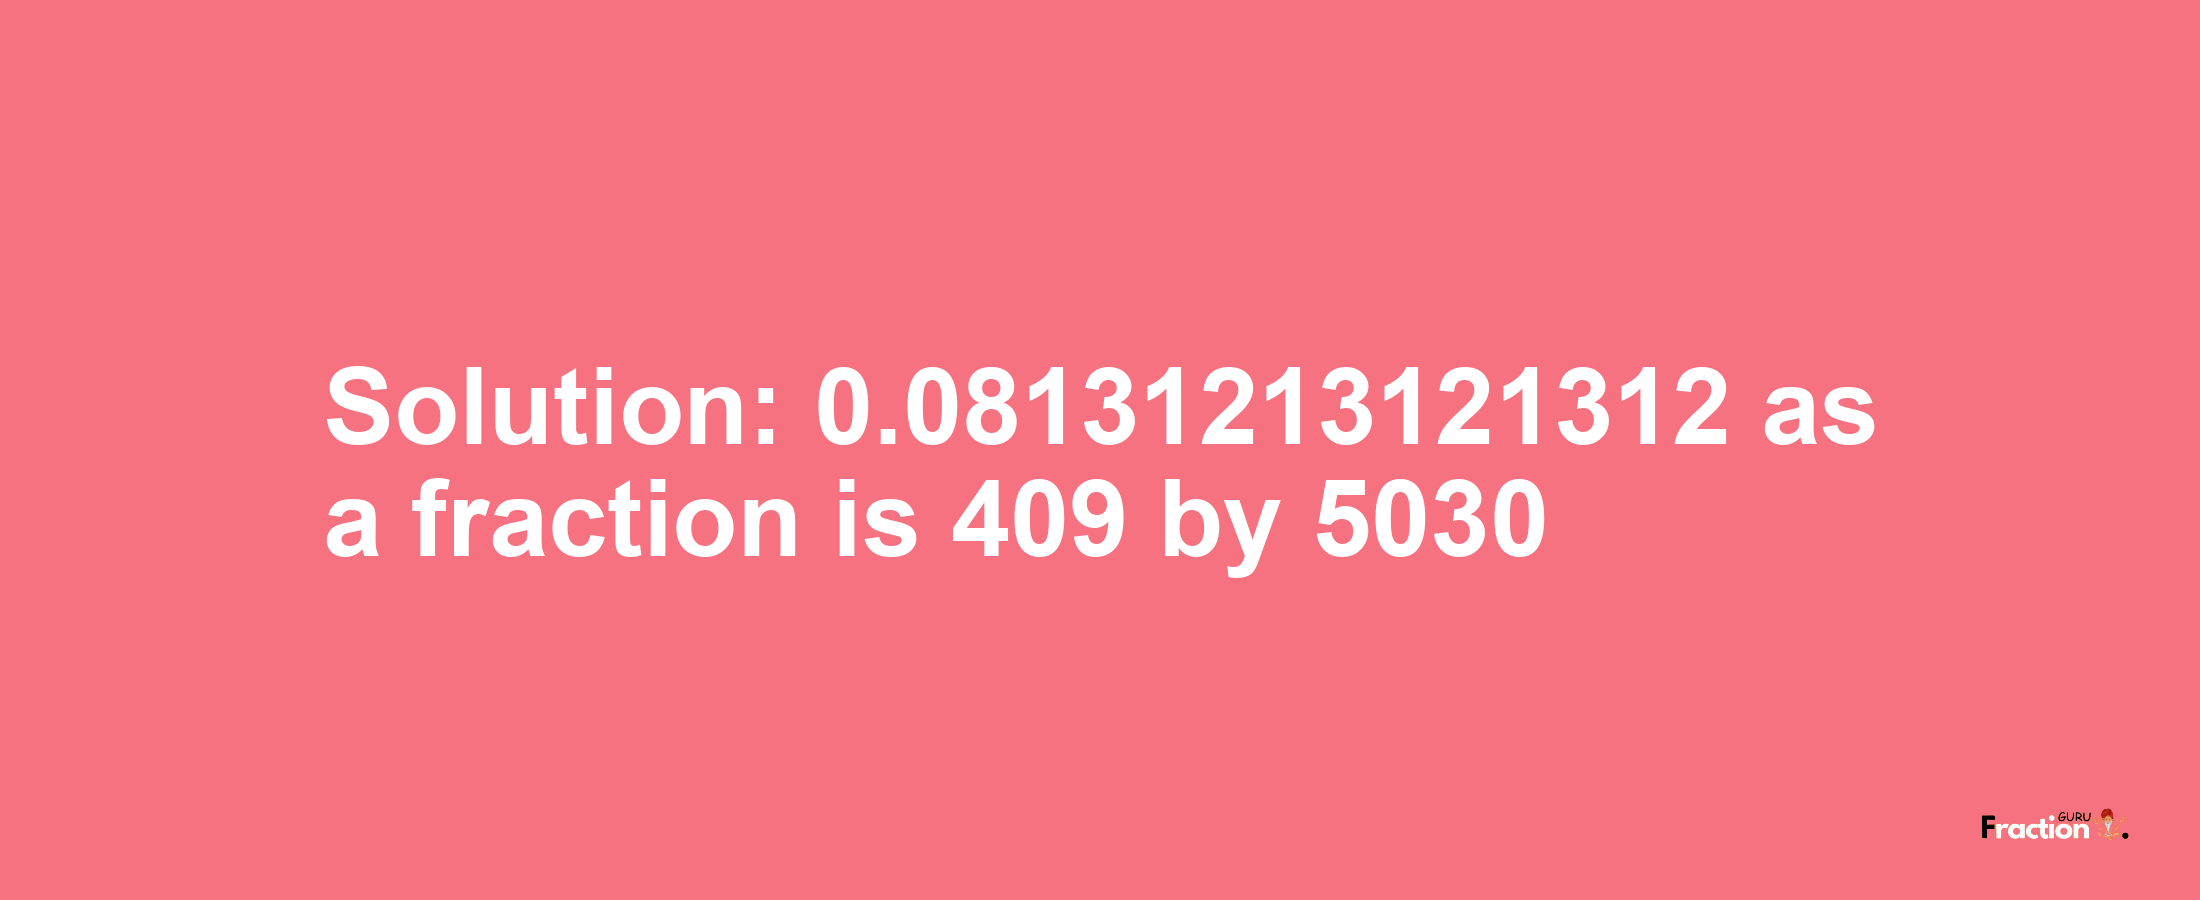 Solution:0.08131213121312 as a fraction is 409/5030